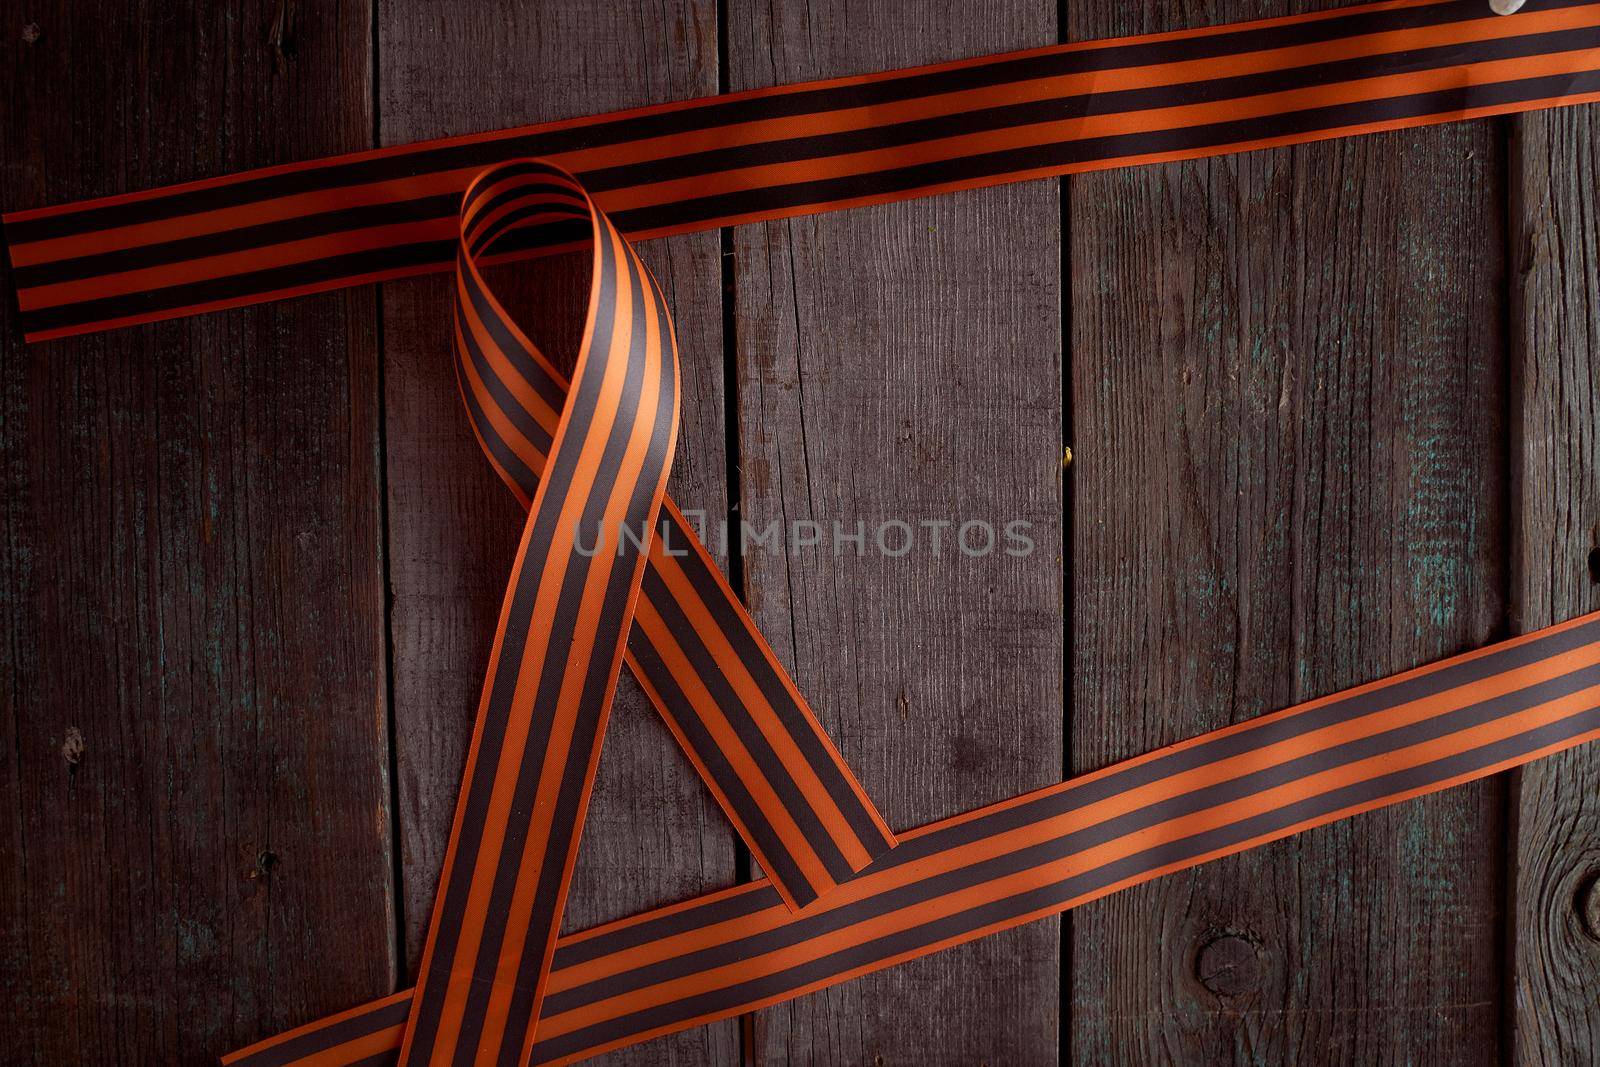 Folded St. George ribbon on a wooden background by Xelar